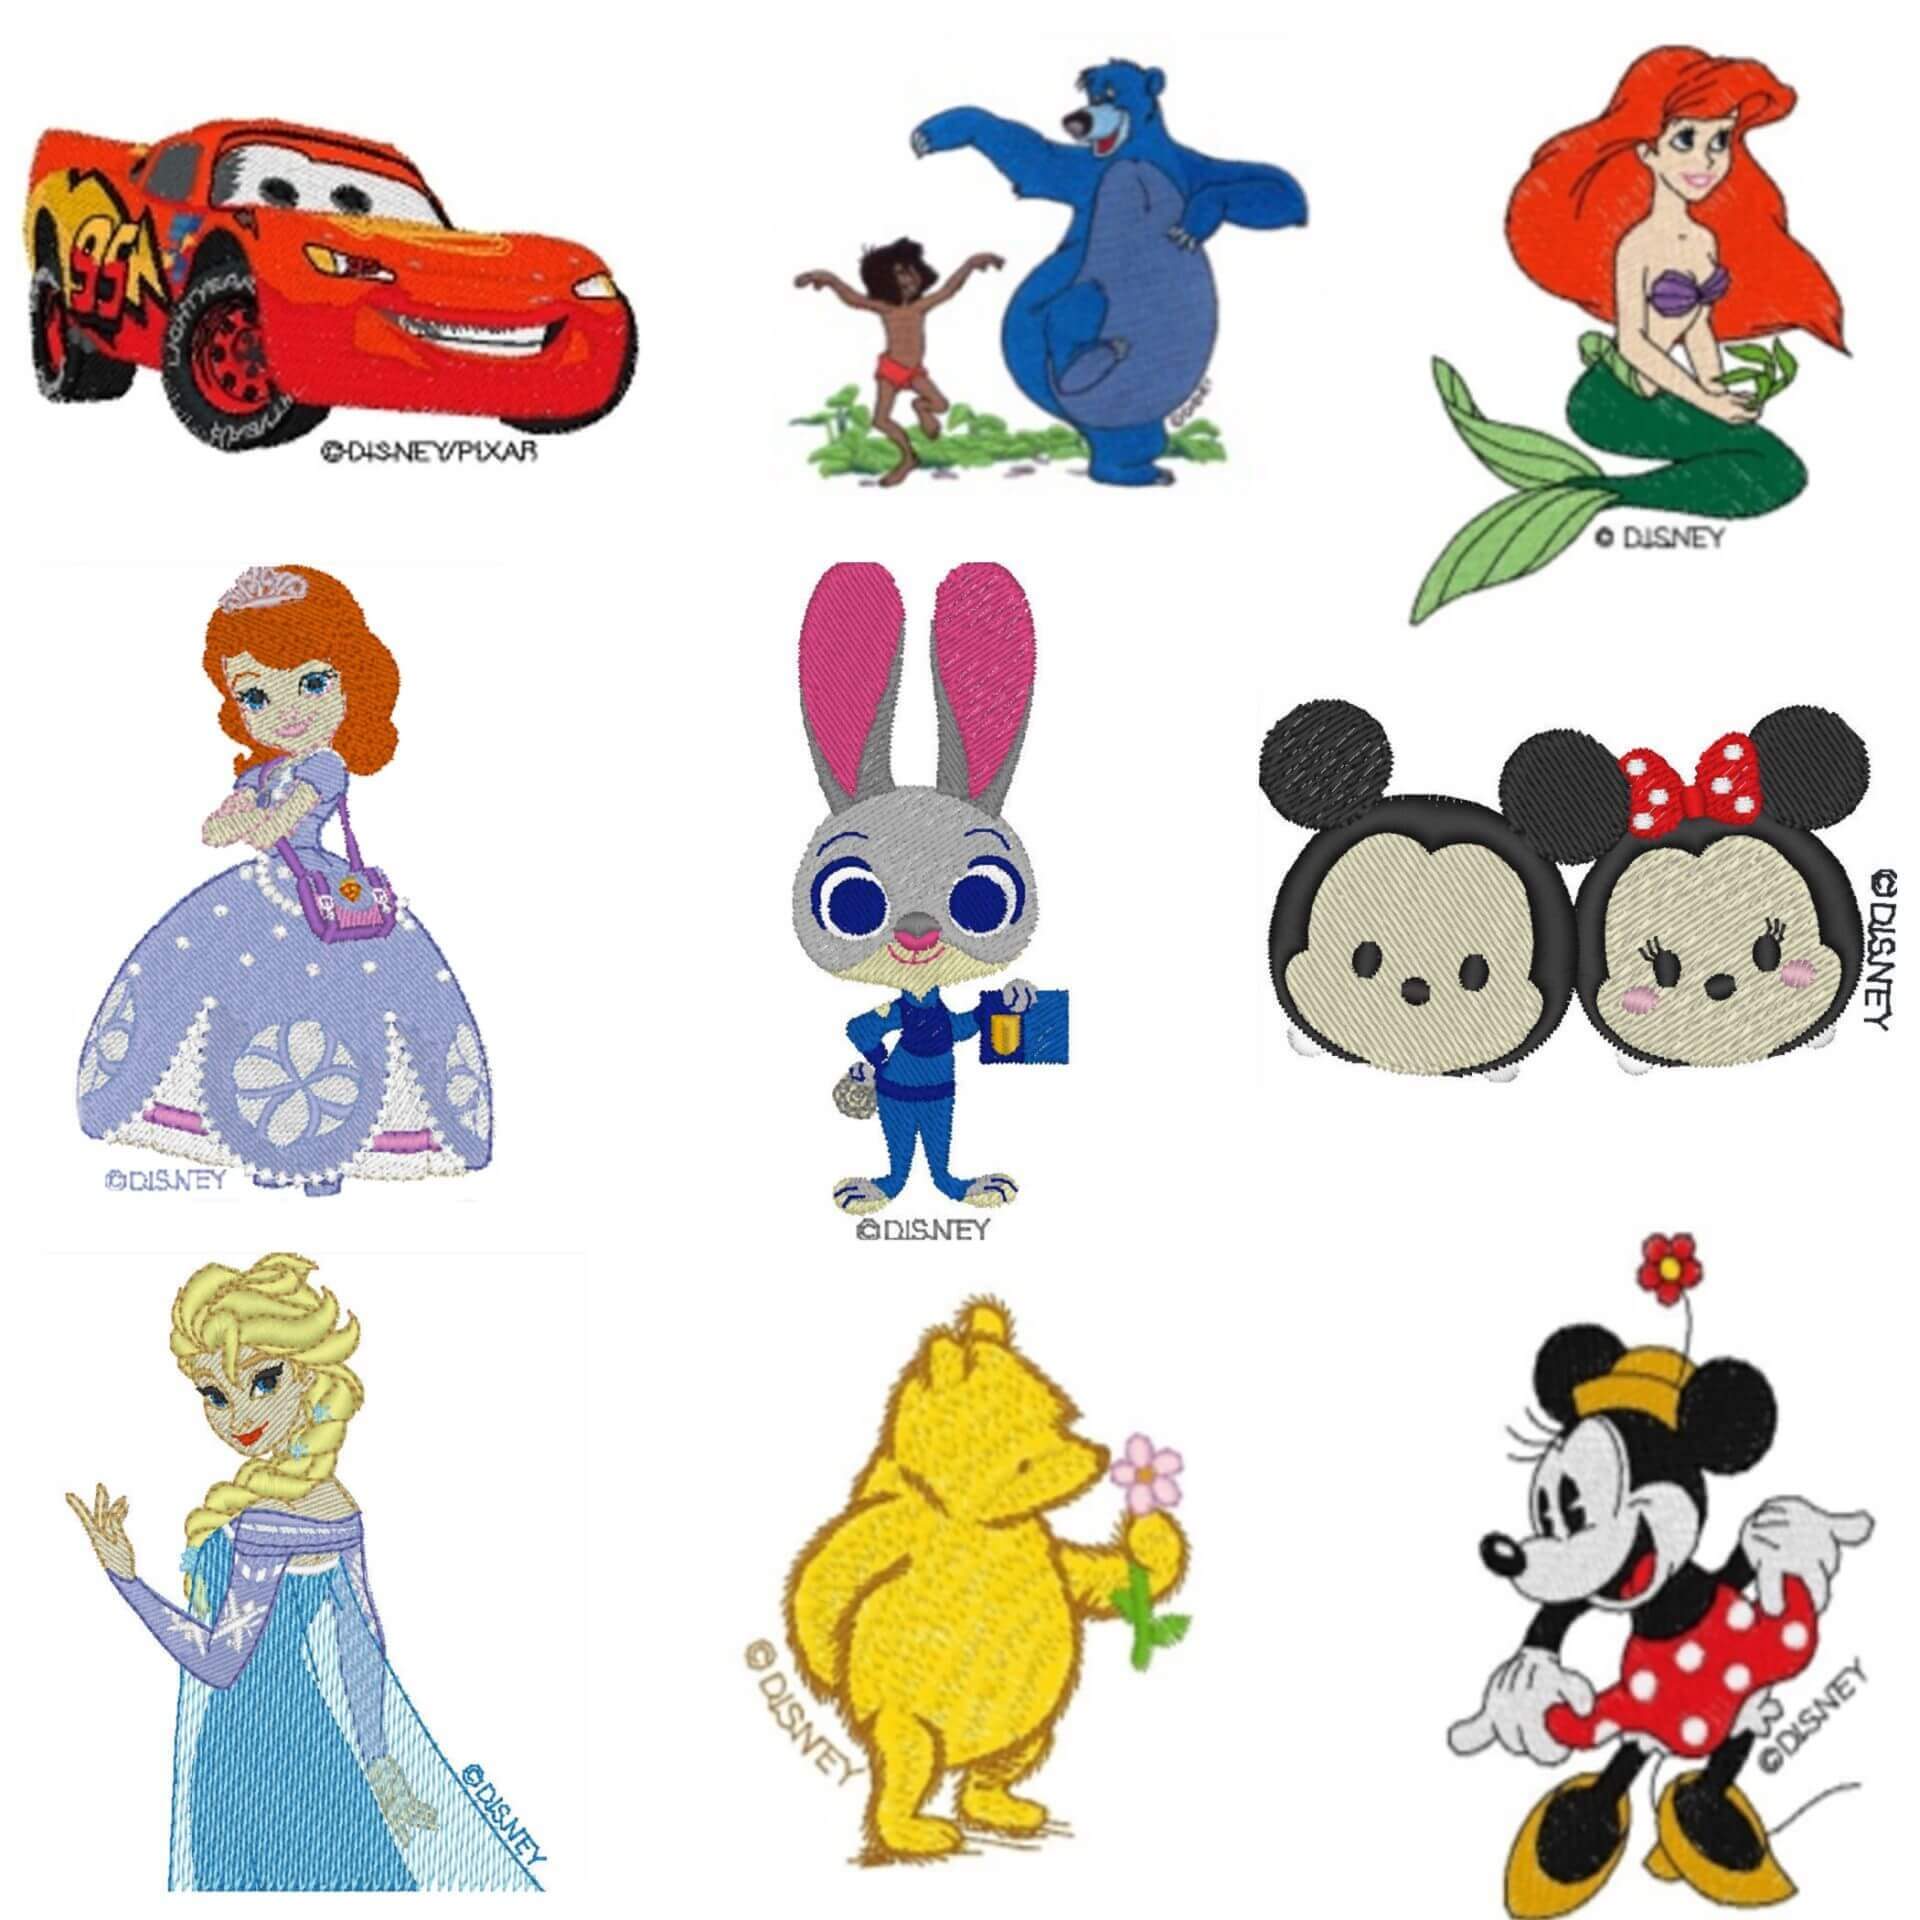 Browse the Disney and Disney-Pixar design collections on www.iBroidery.com. Here you will find your favorite classic and new Disney characters, giving you an endless supply of adorable project possibilities. Bring the magic of Disney to your fabrics! All rights reserved. ©Disney. *Additional purchase required.